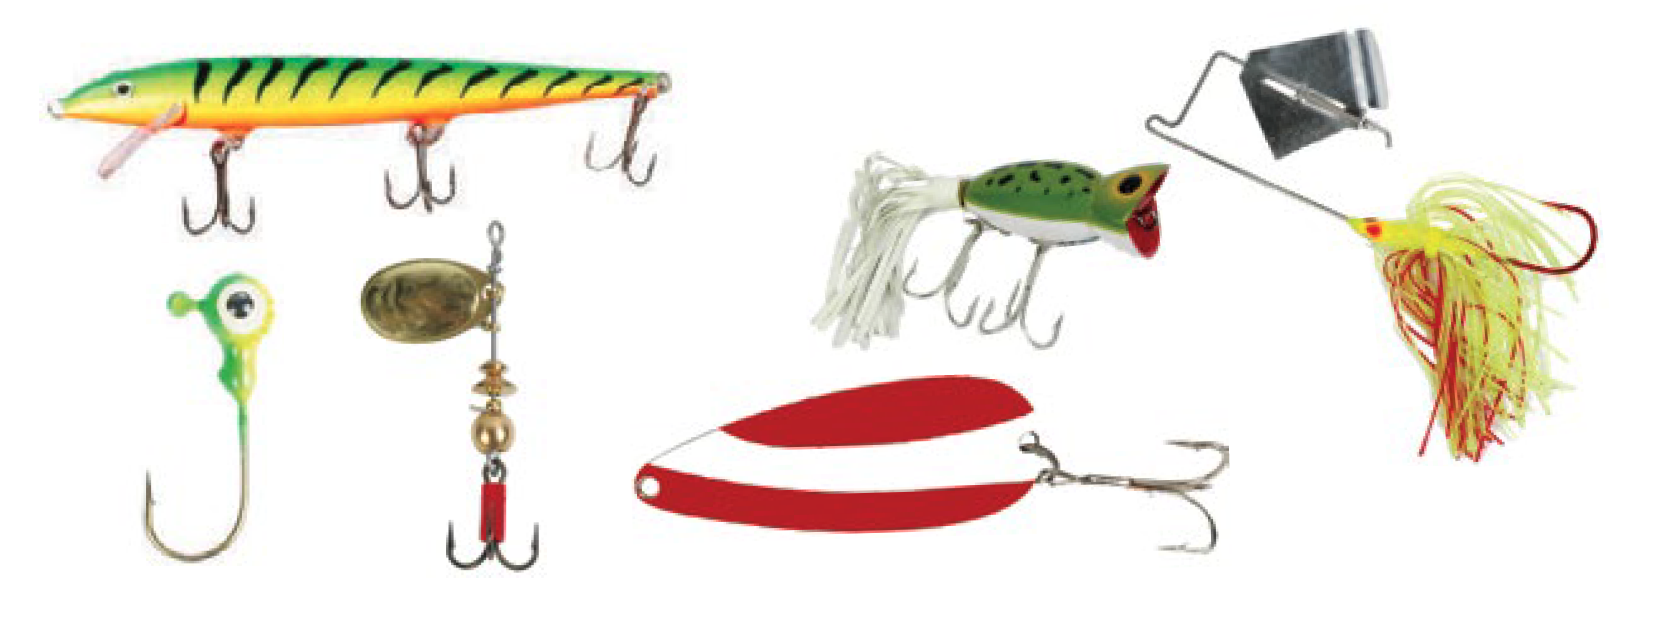 Artificial Lure/Baits